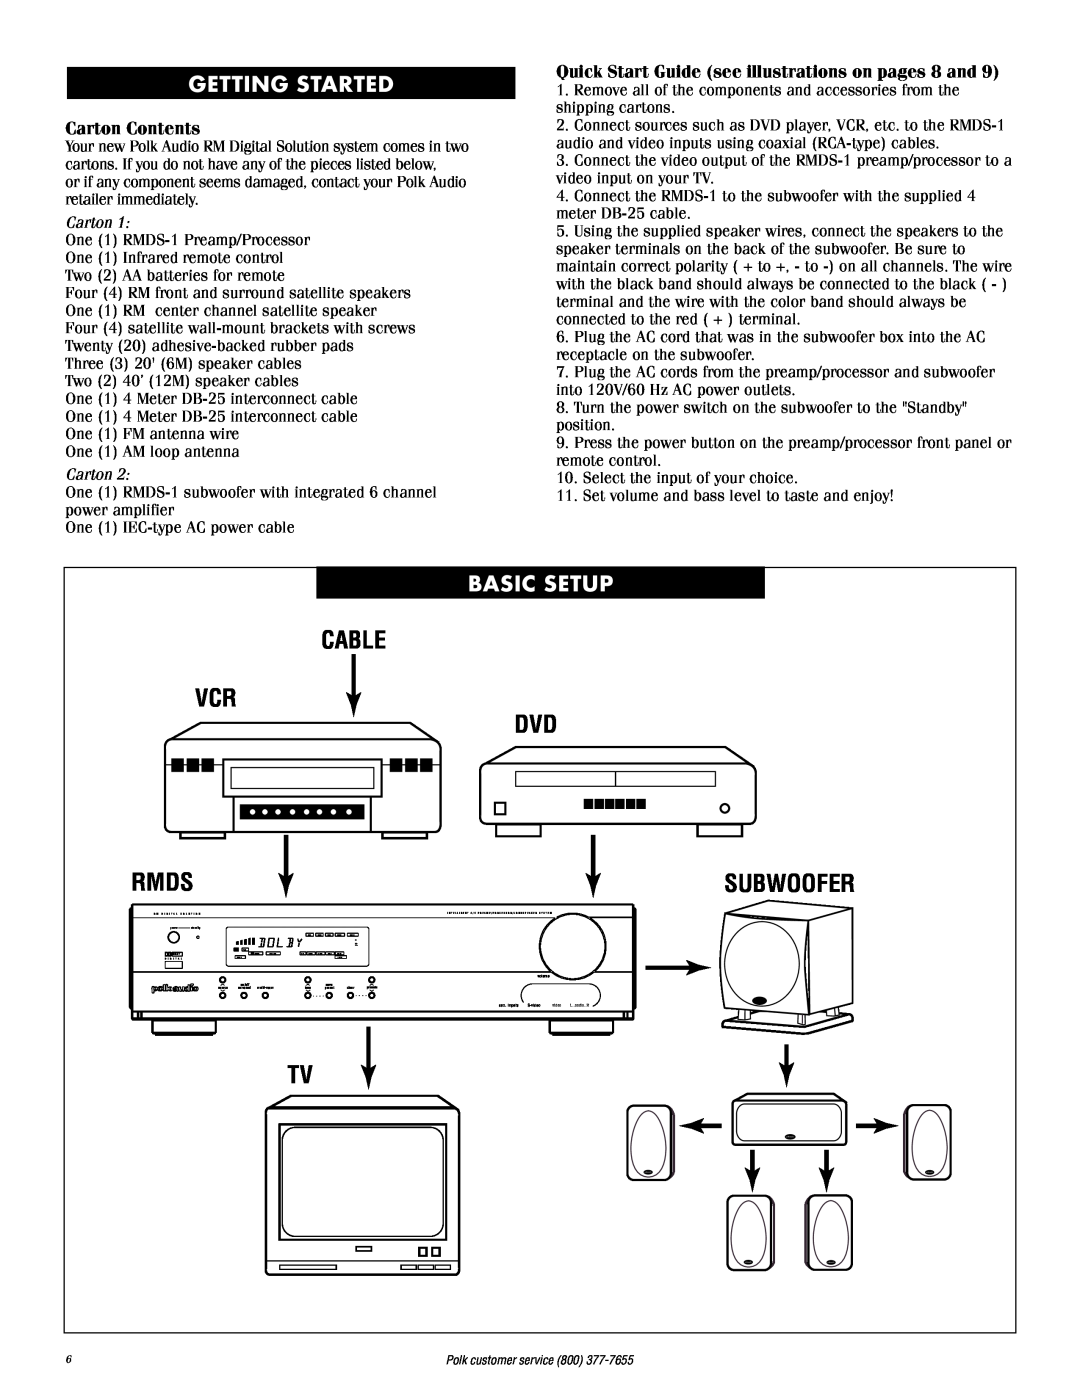 Polk Audio RMDS-1 instruction manual Getting Started, Basic Setup, Subwoofer, Carton Contents, Rmds, Cable 